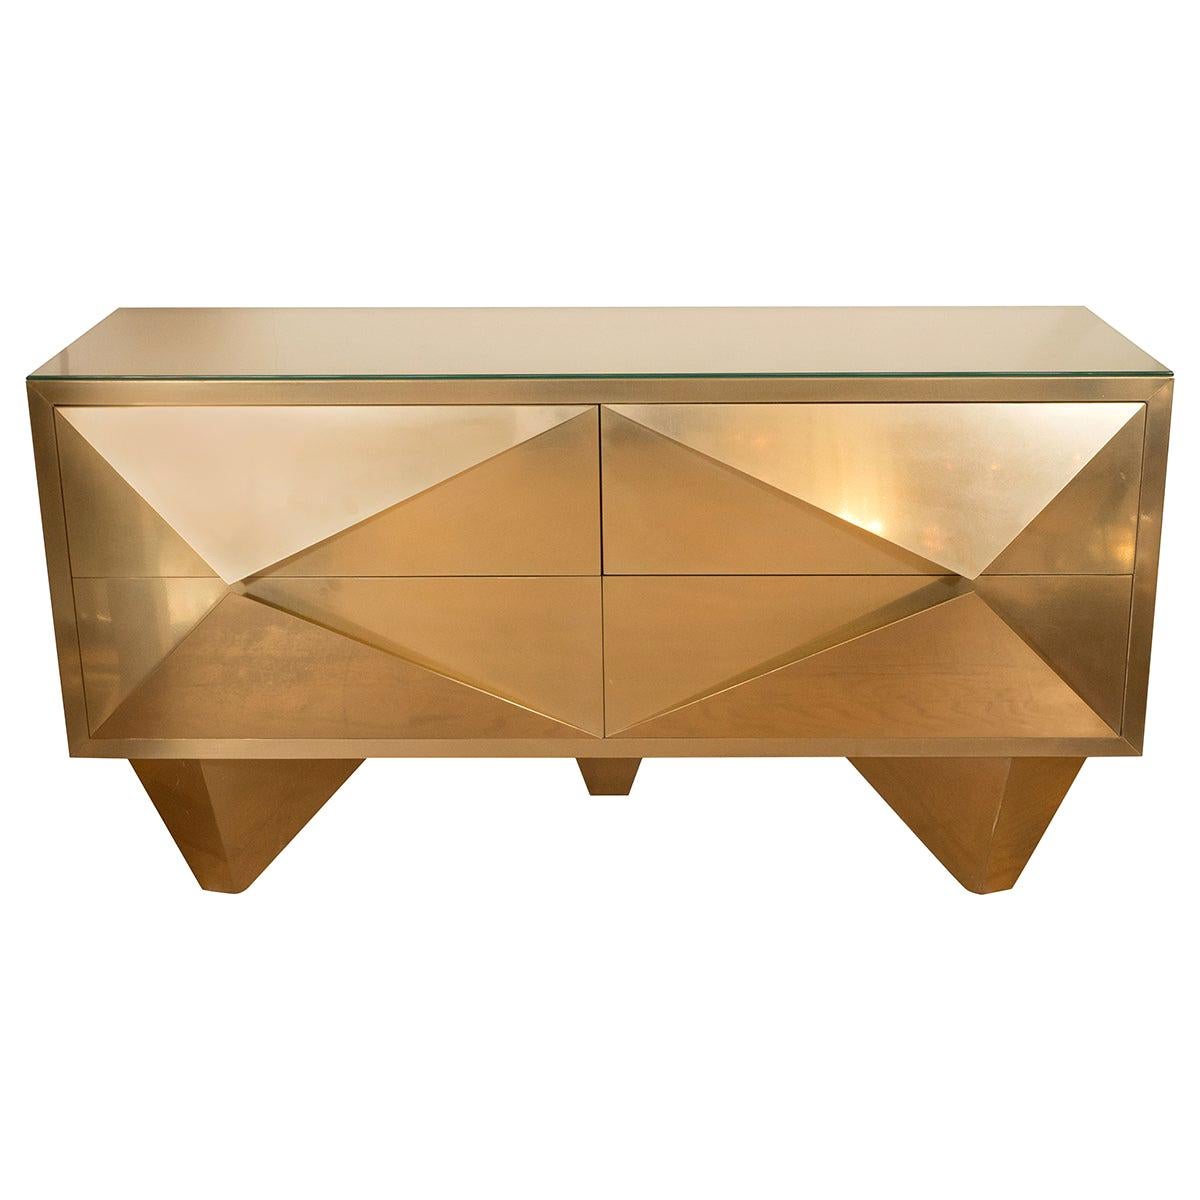 Pair of Brass Cabinets with Diamond Form Front Details